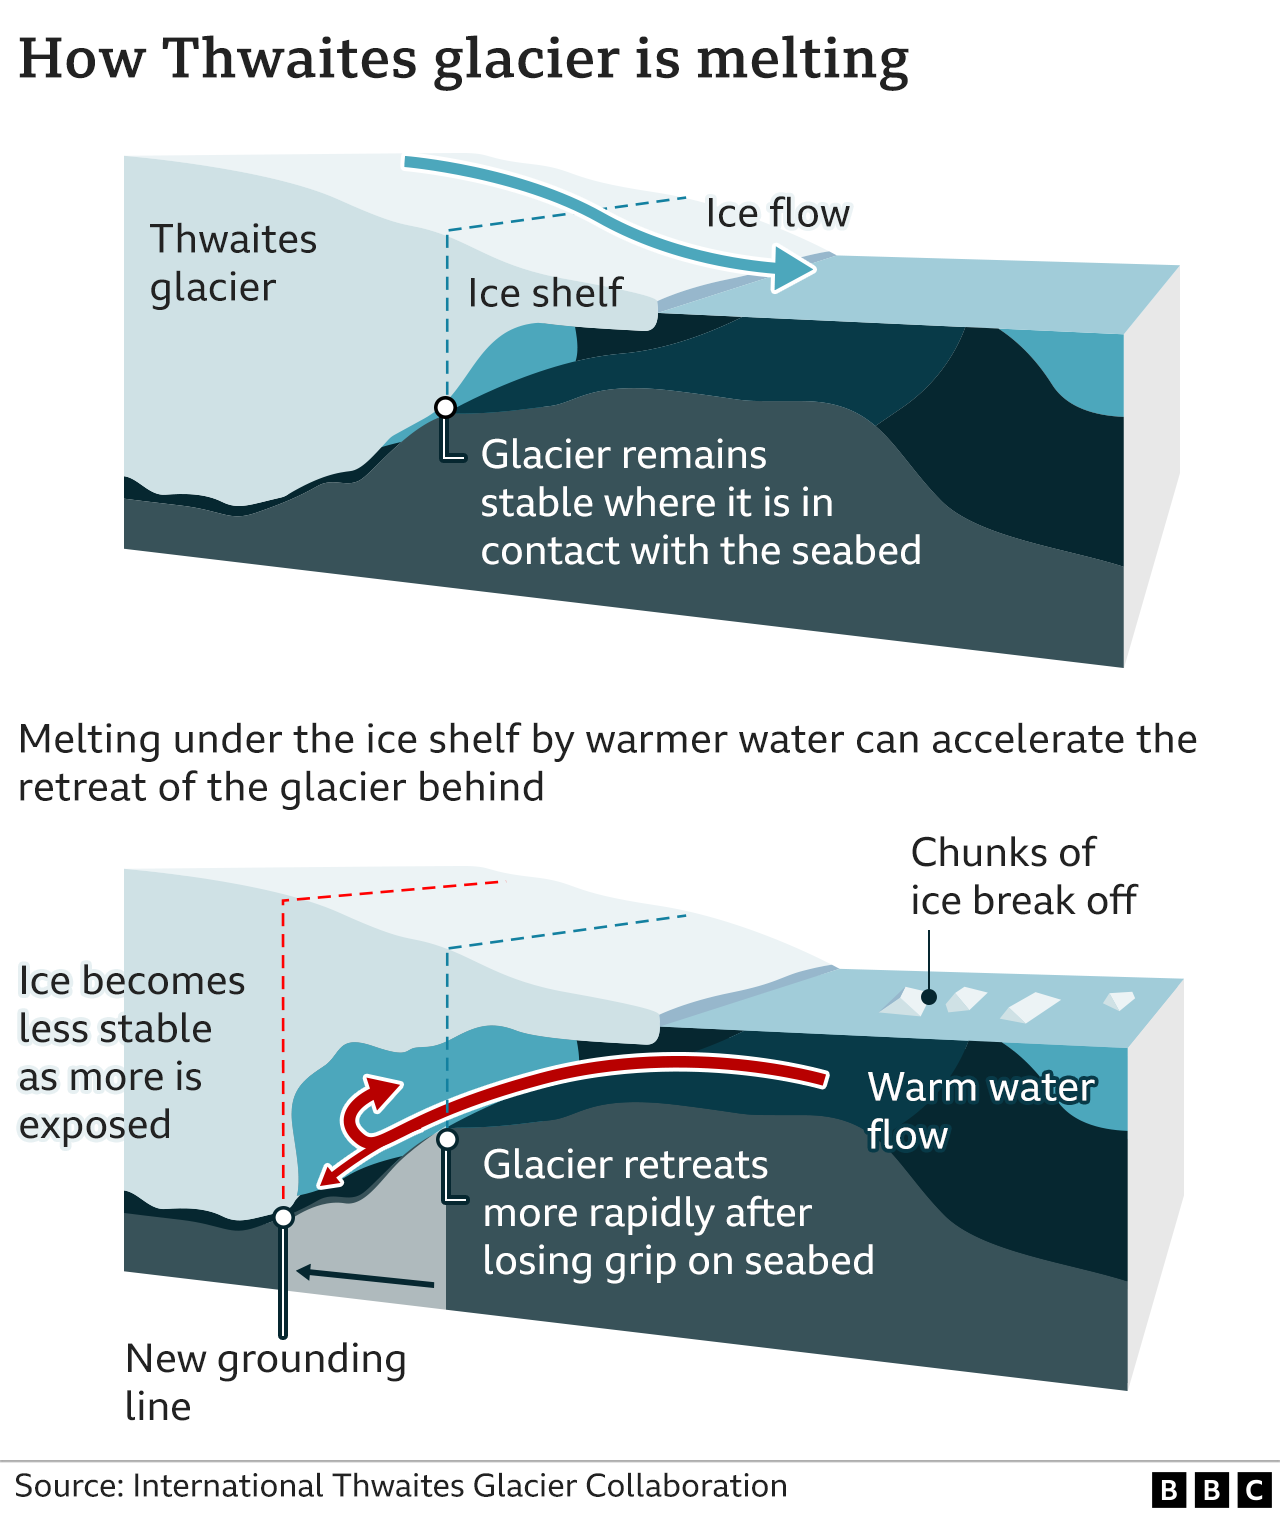 Thwaites Glacier infographic. (i) Thwaites Glacier and its connecting floating ice shelf extending into the ocean. (ii) Increased melting of the glacier and the ice shelf by warm ocean waters destabilises the glacier, causing it to retreat more rapidly into deeper waters.